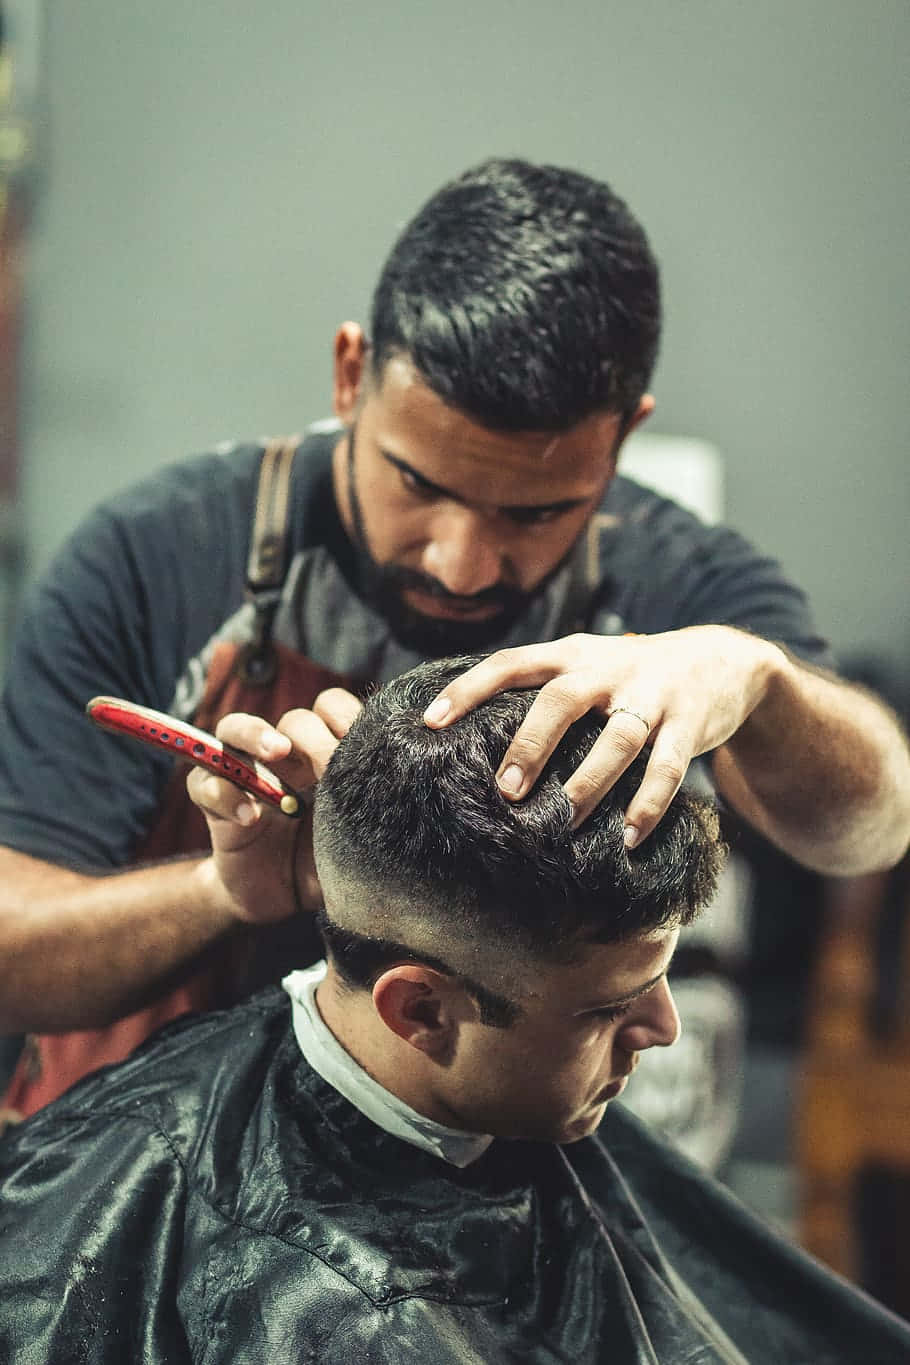 Barber Holding The Head While Cutting The Hair Wallpaper